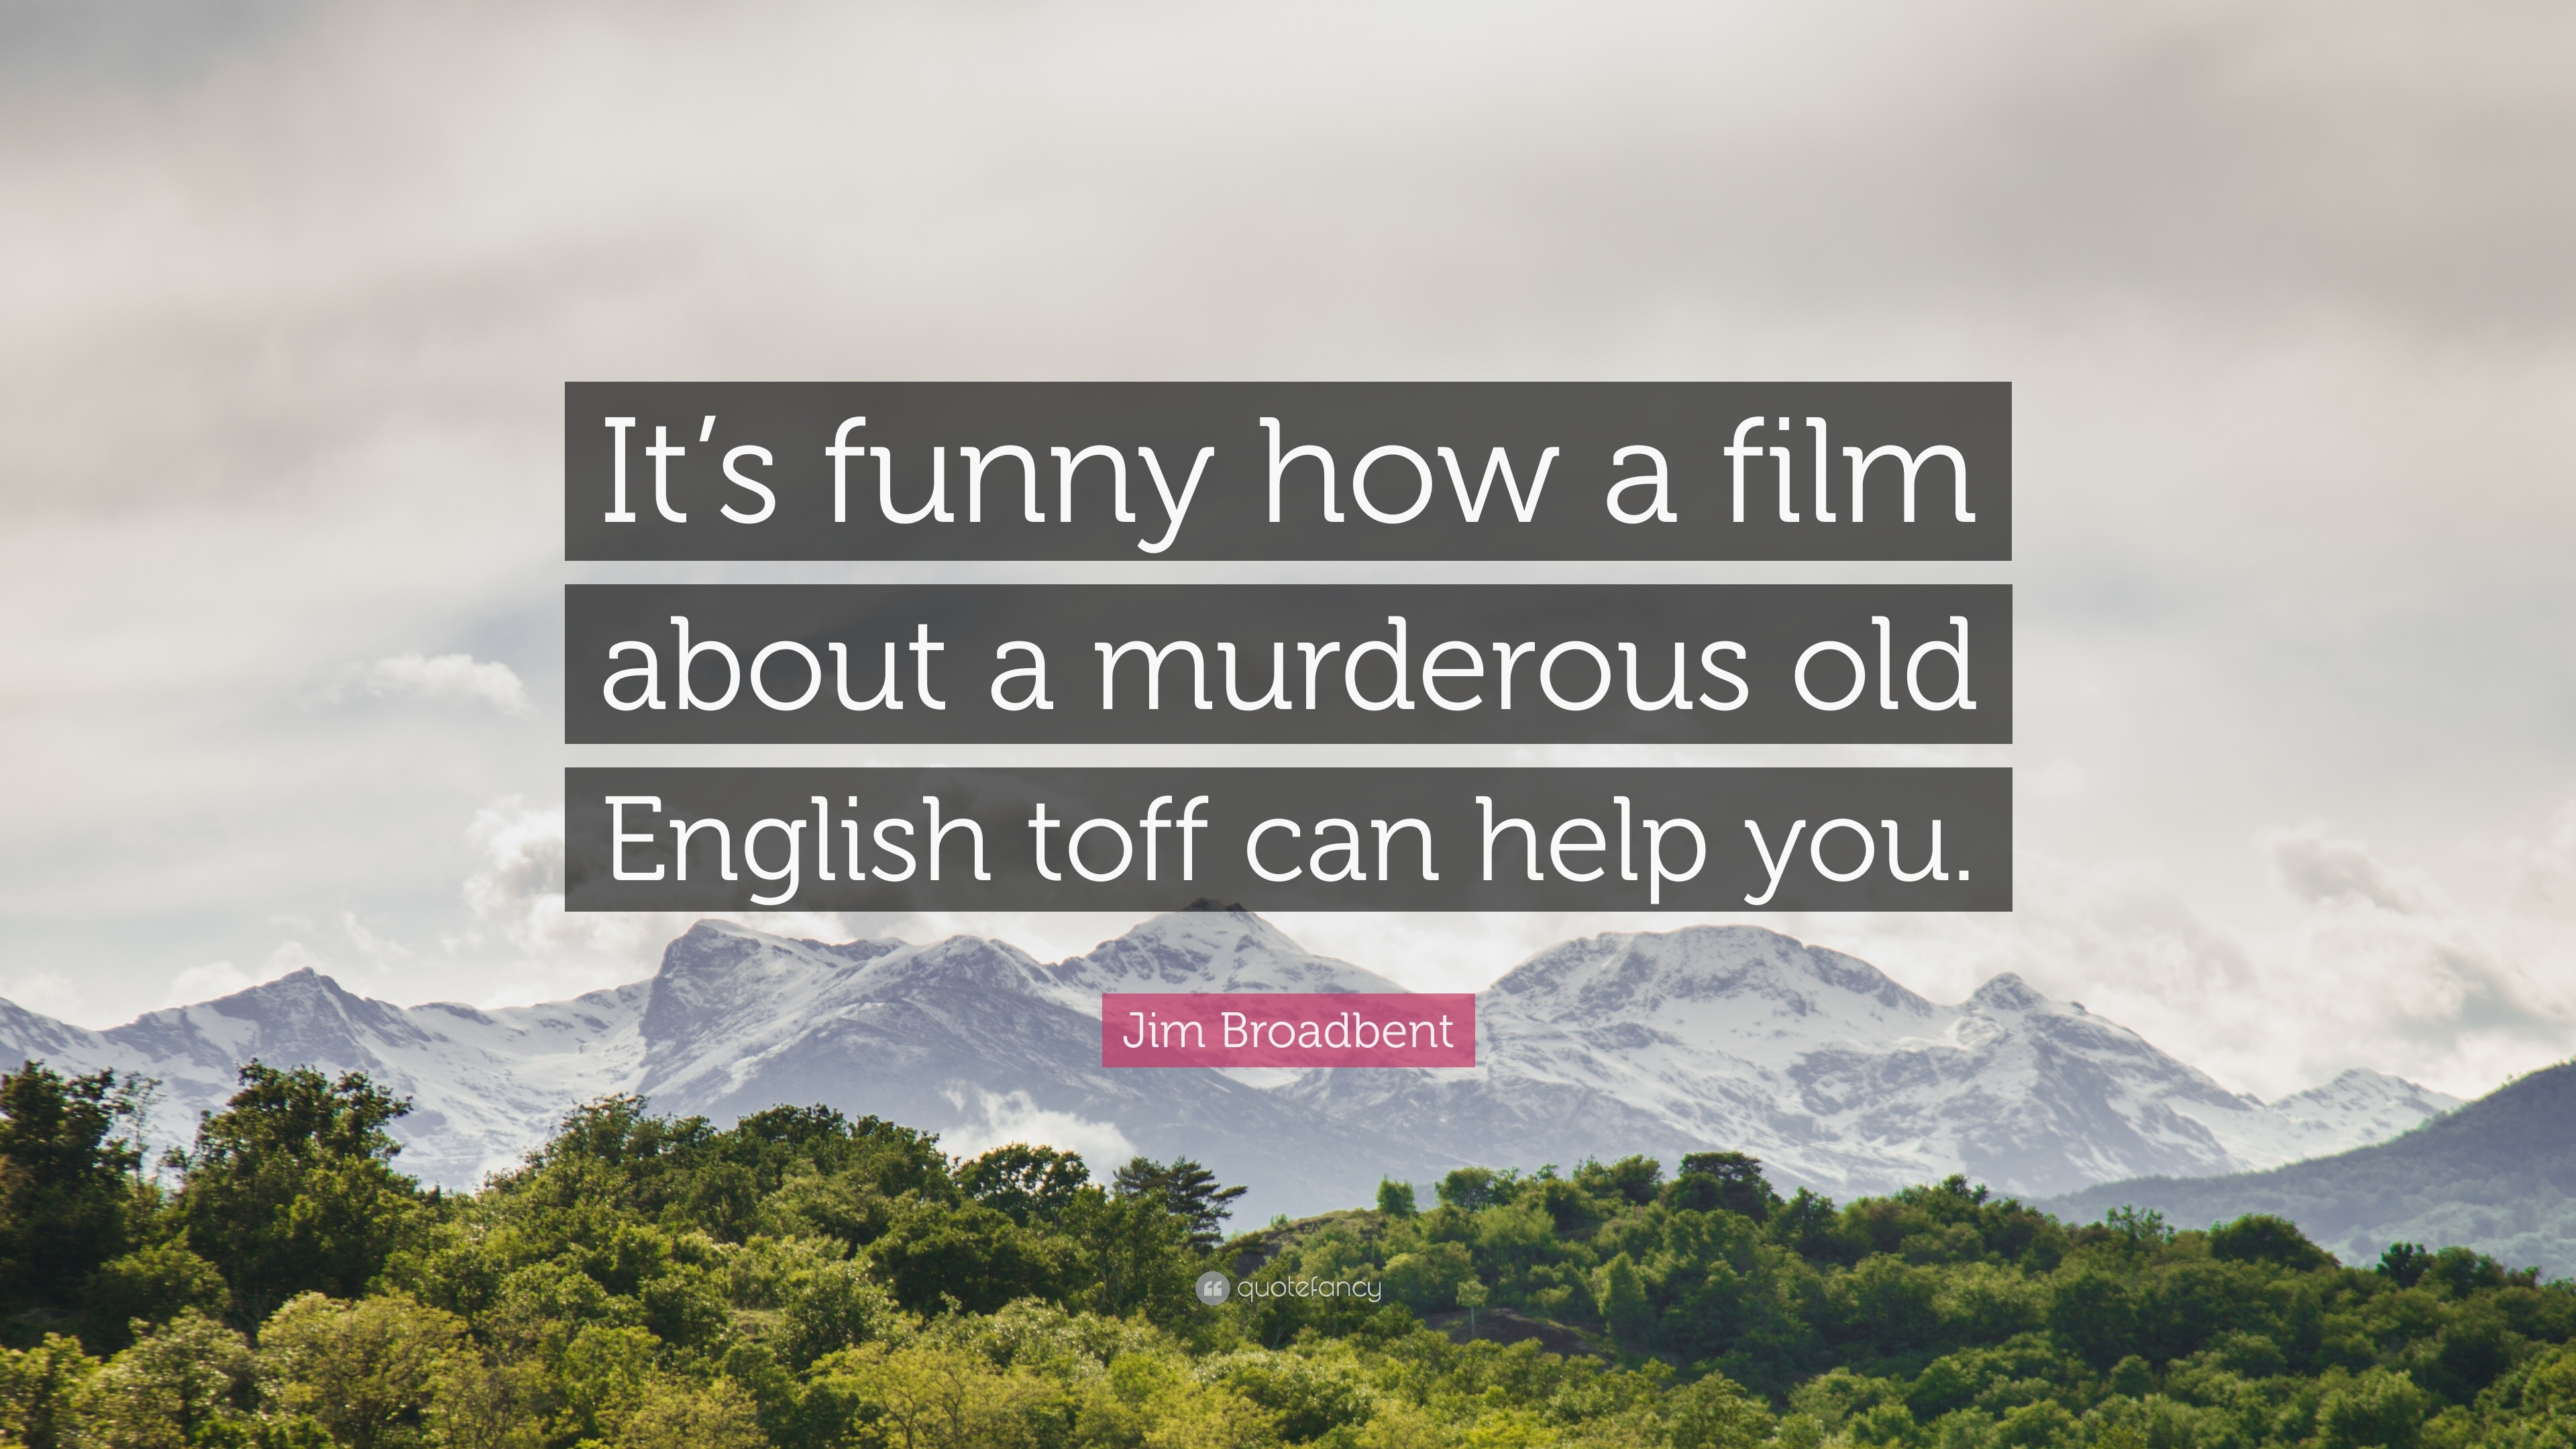 Jim Broadbent Quote: “It's funny how a film about a murderous old English  toff can help